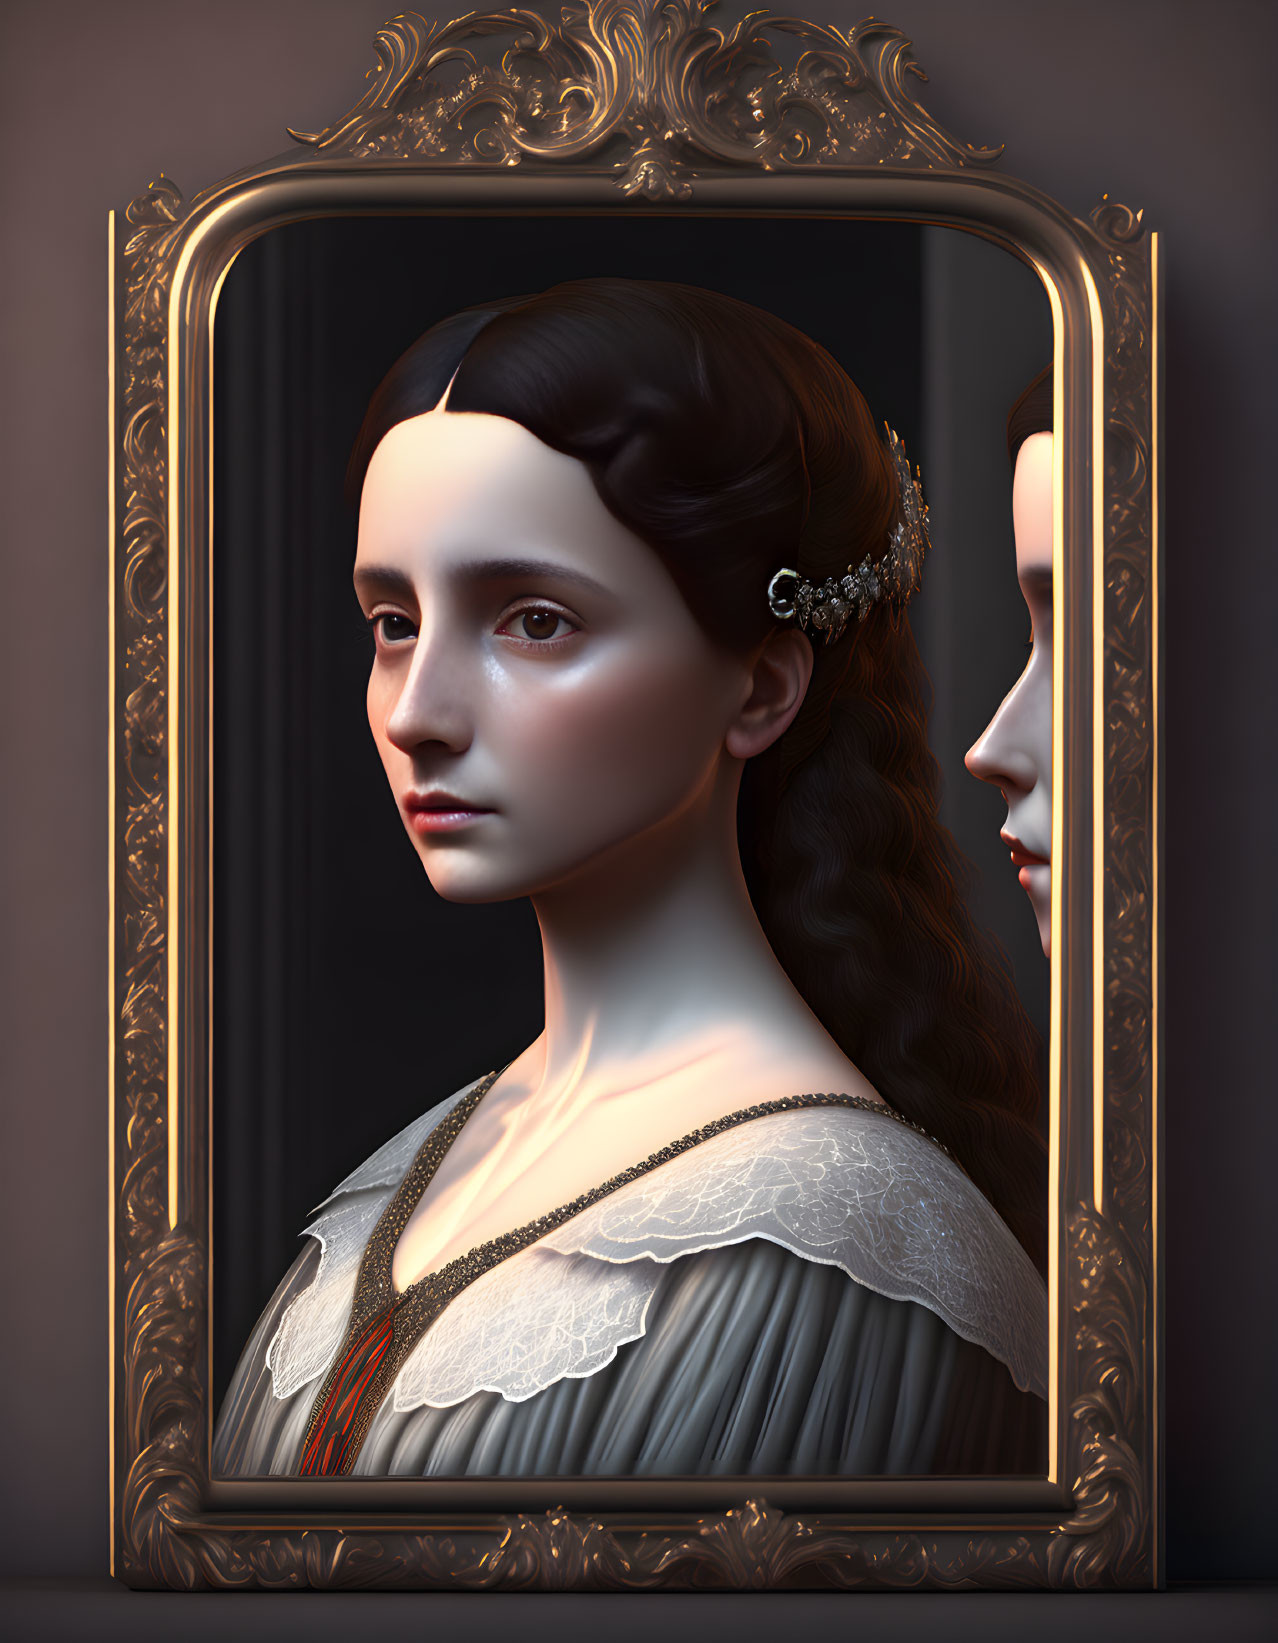 Young mirror lady